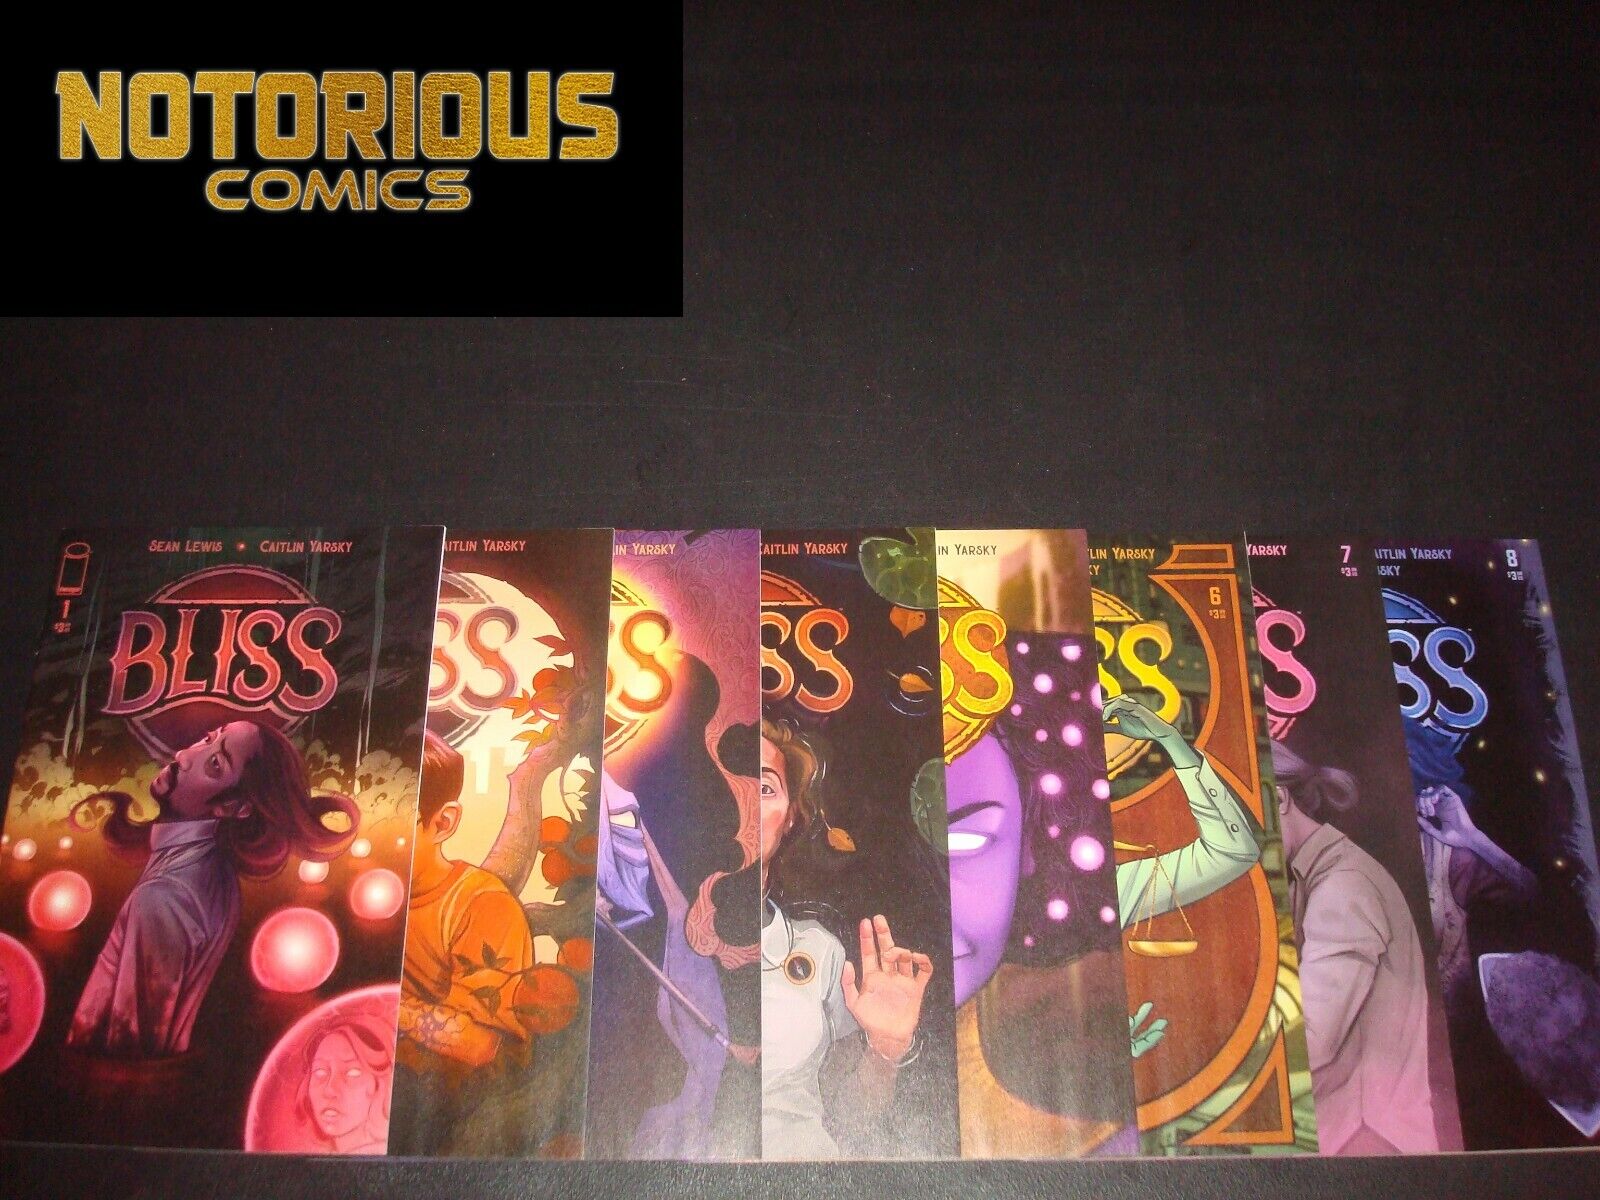 Bliss 1-8 Complete Comic Lot Run Set Image Sean Lewis Collection